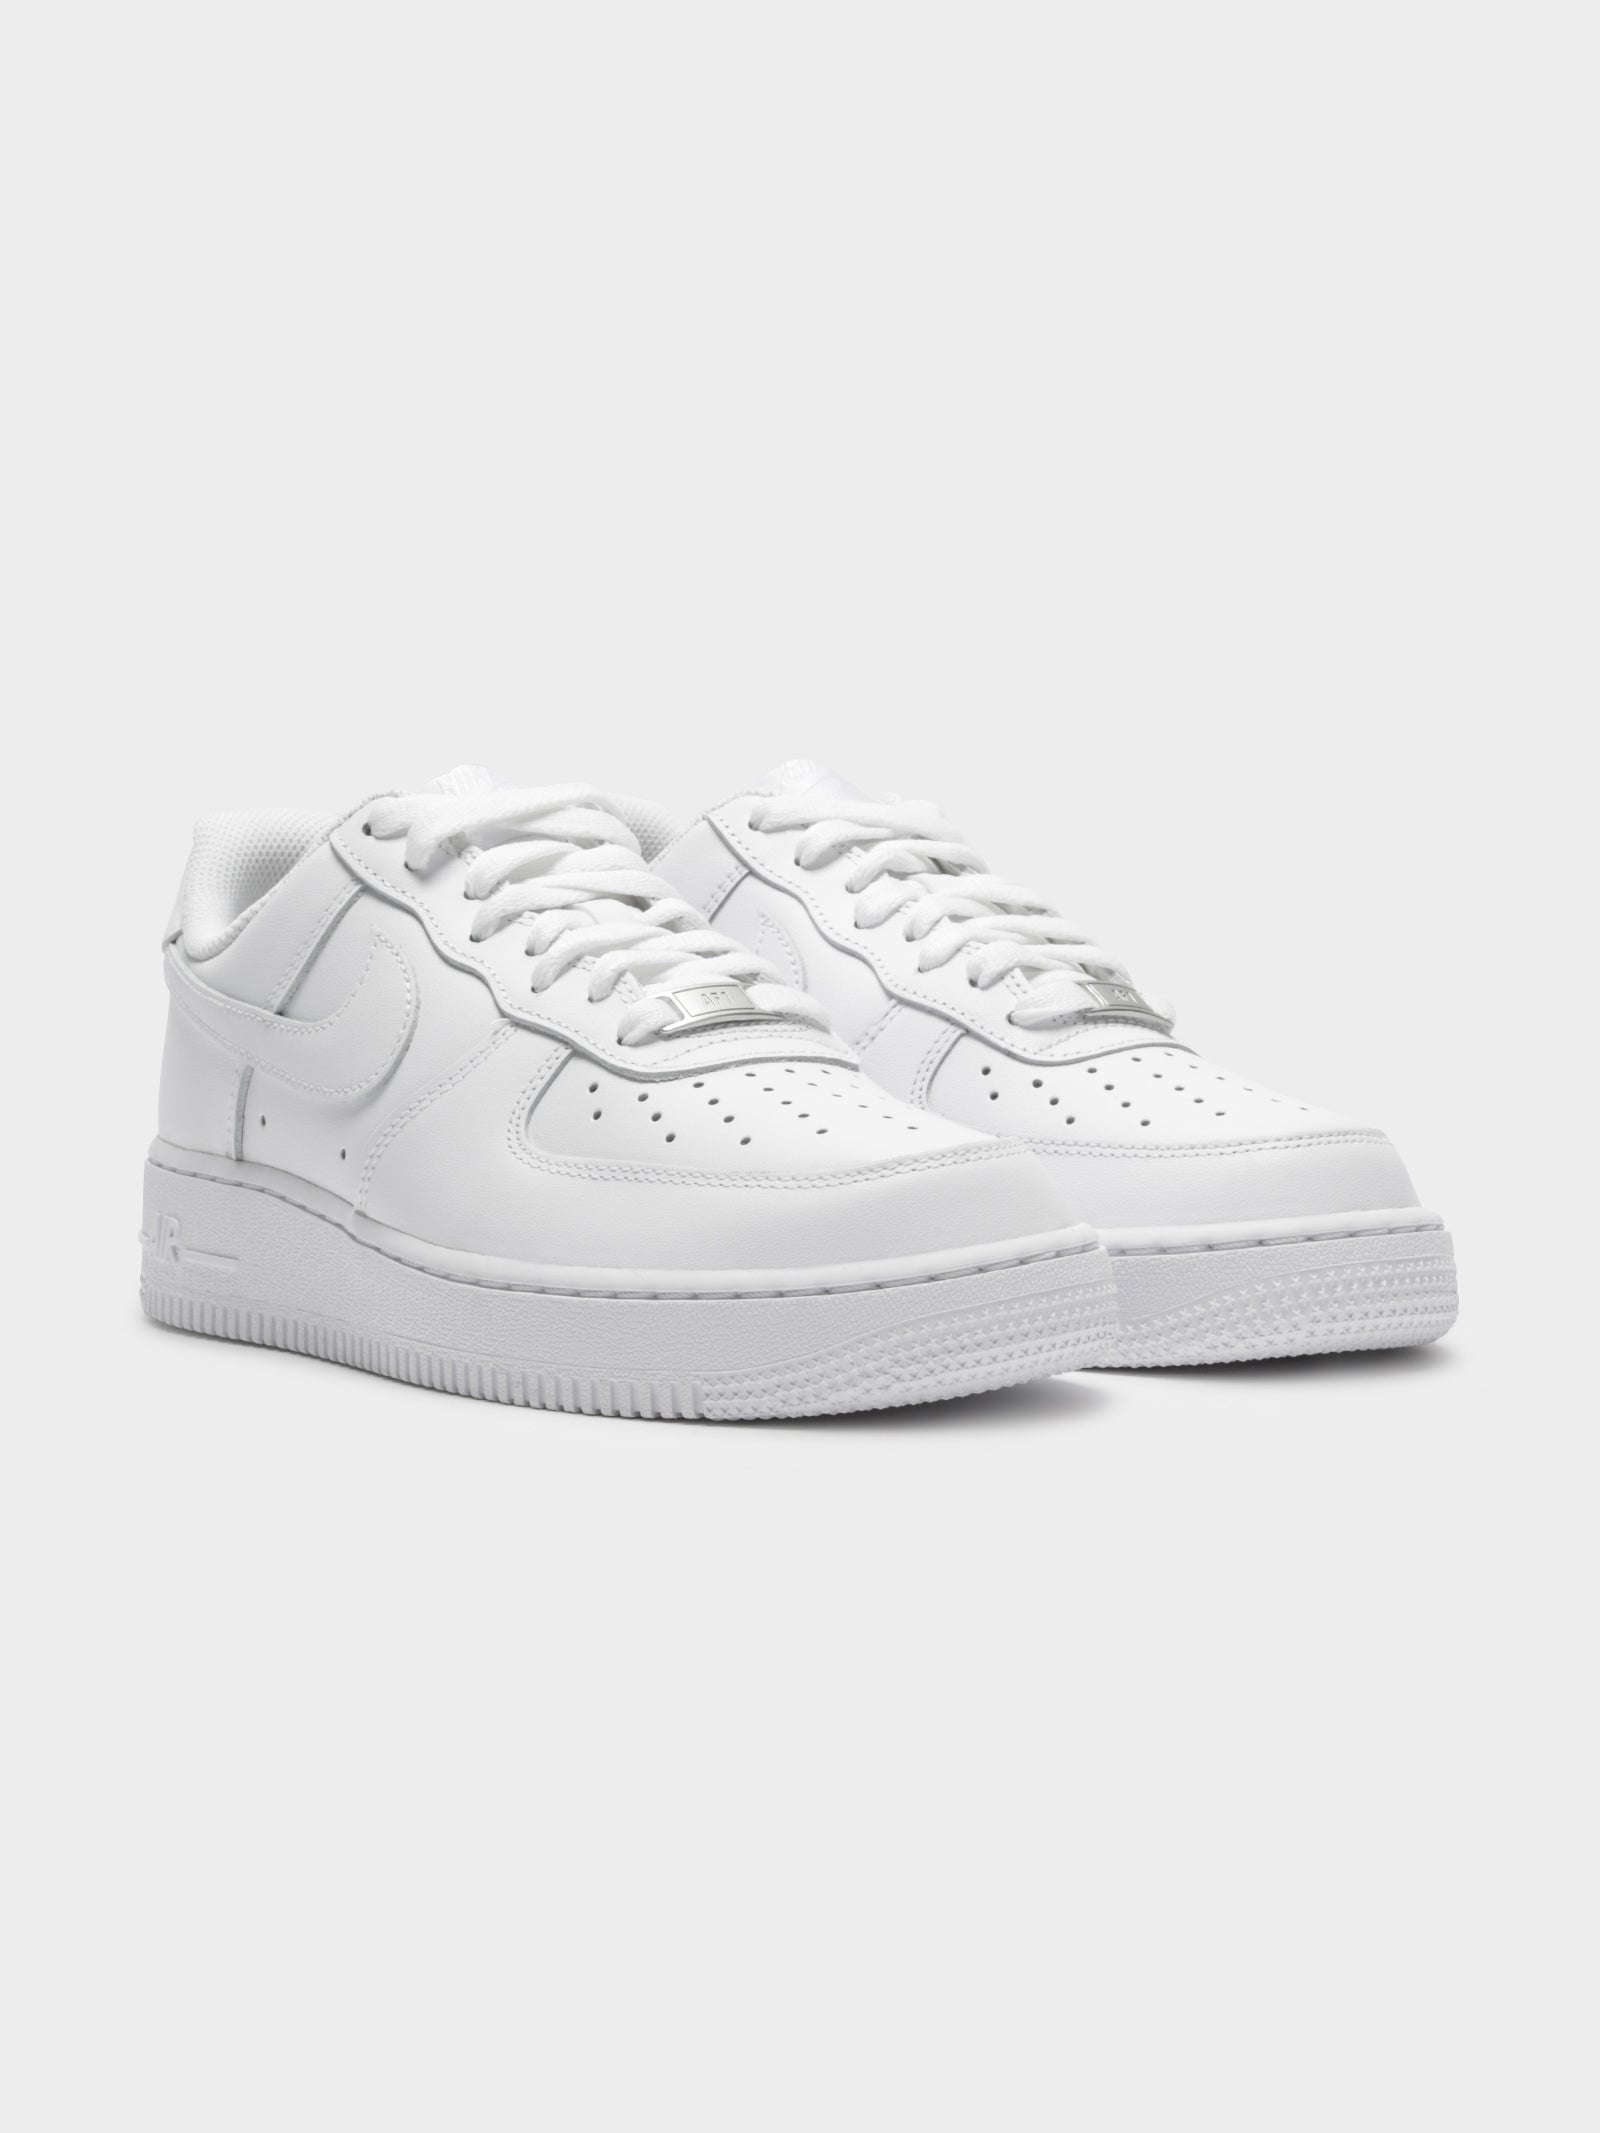 Womens Air Force 1 '07 in White